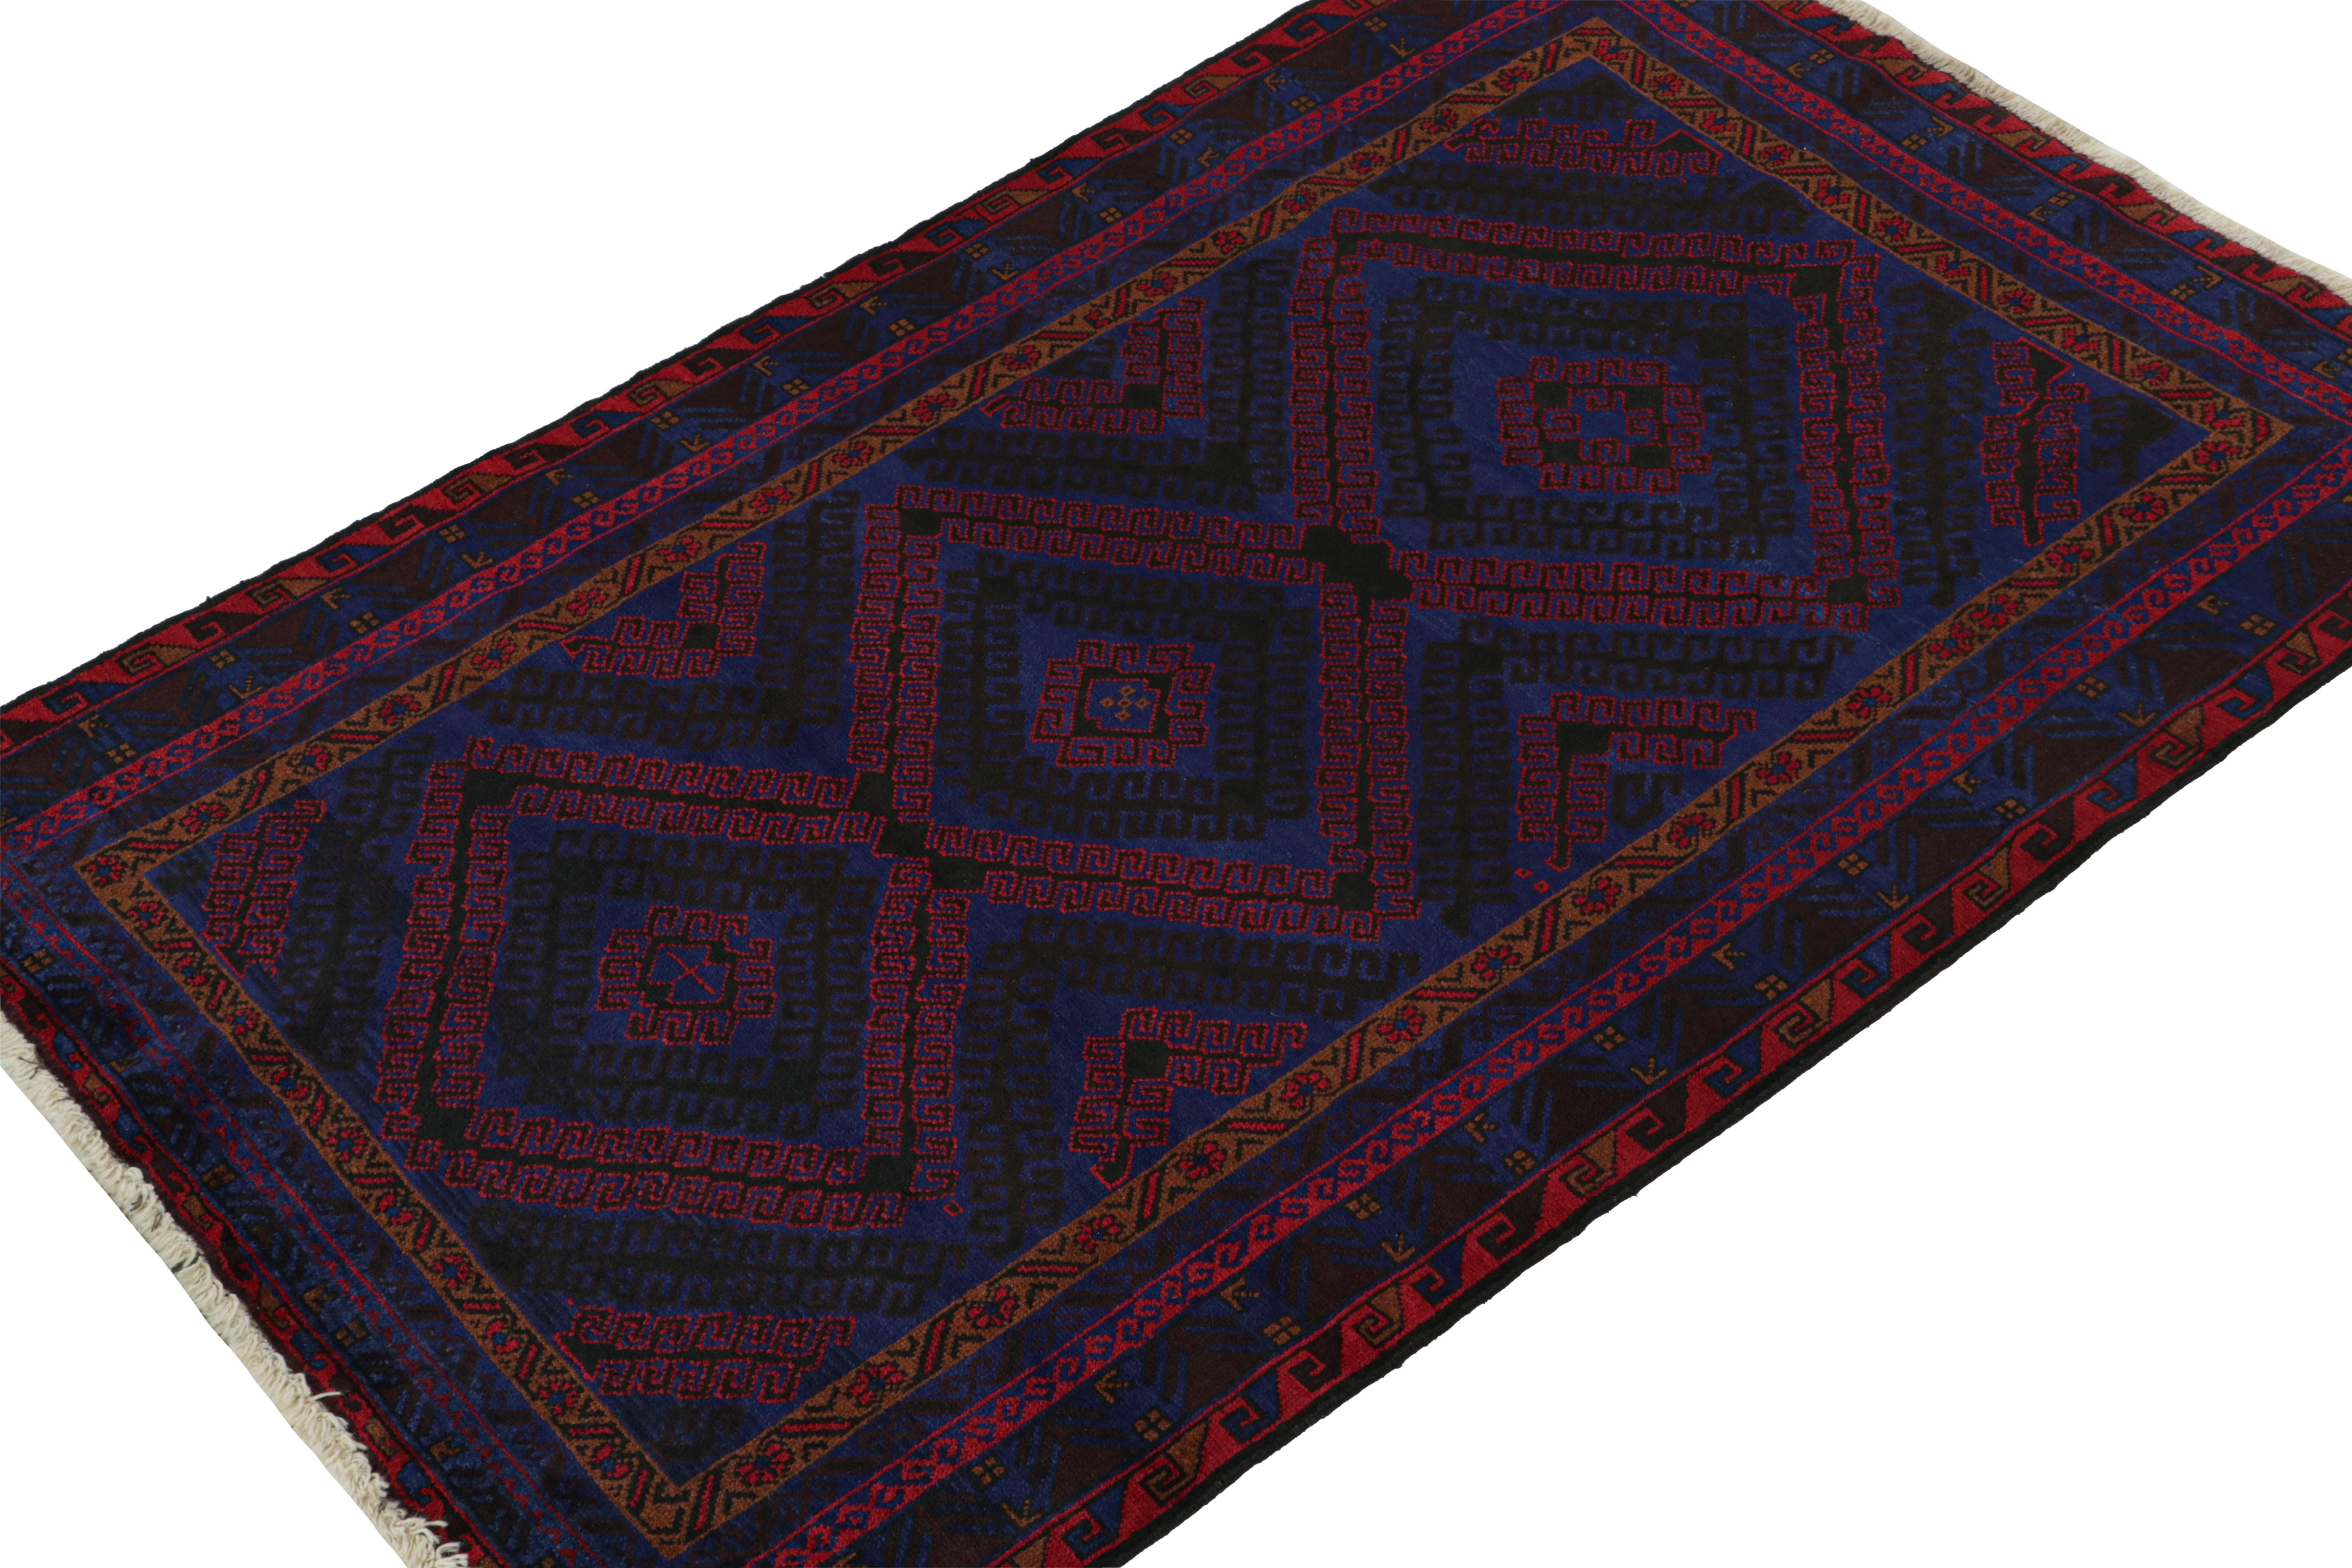 Hand-knotted in wool & goat hair, this vintage tribal rug of the 1950s is a coveted addition to Rug & Kilim’s Antique & Vintage collection. 

On the Design:
 
Coming from the Baluch tribe, this 4x6 rug boasts diamond patterns in rich tones of red,